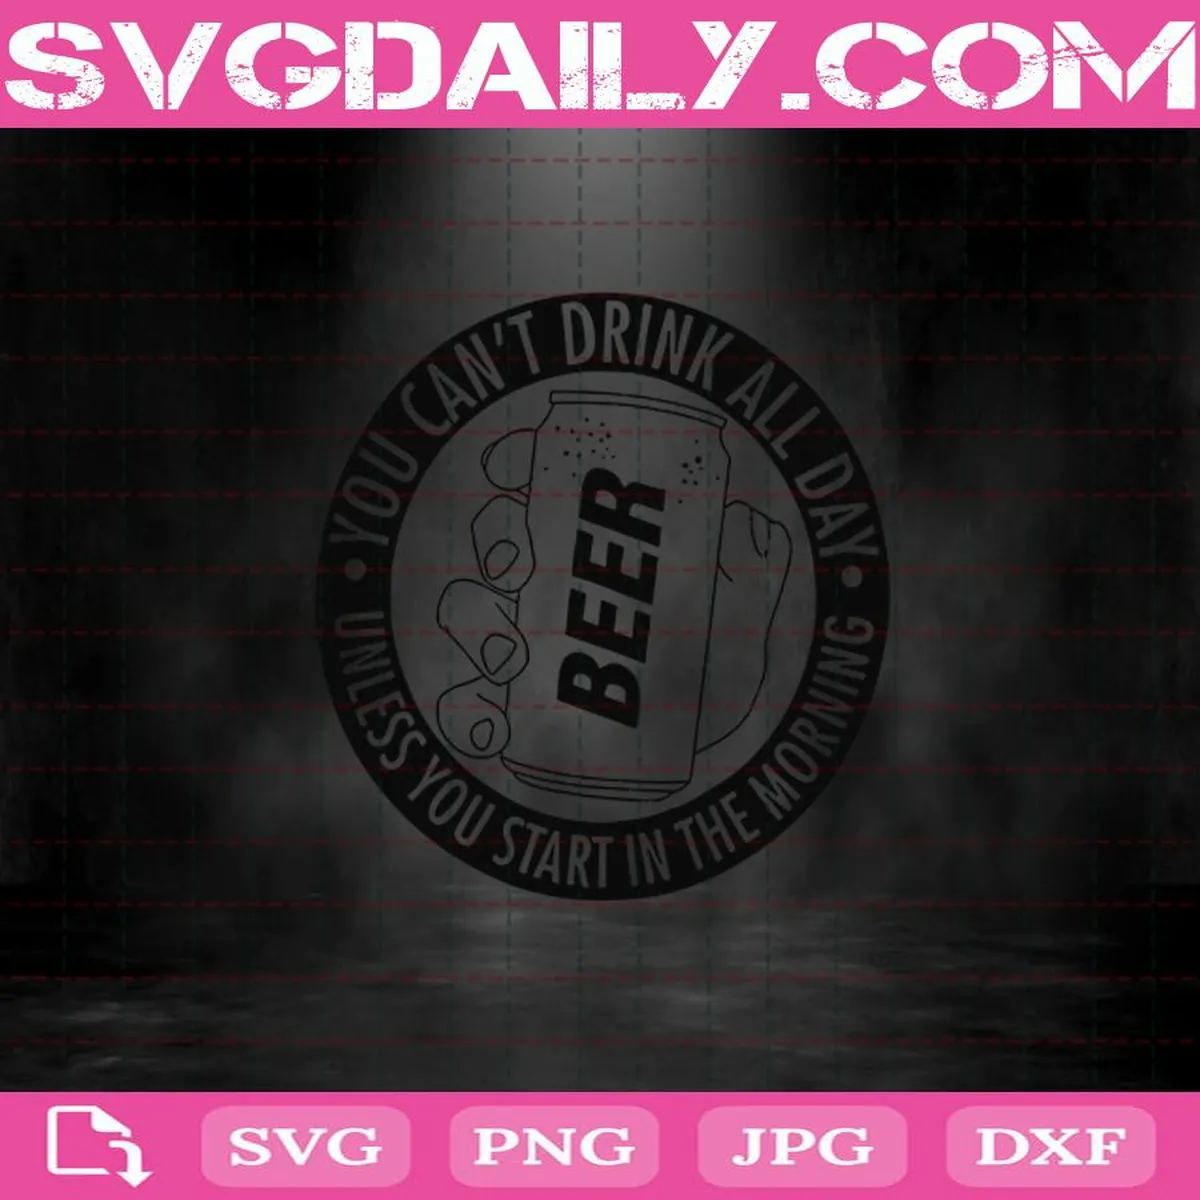 You Can’t Drink All Day Unless You Start In The Morning Svg, Drink Beer Svg, Beer Svg Png Dxf Eps Download Files